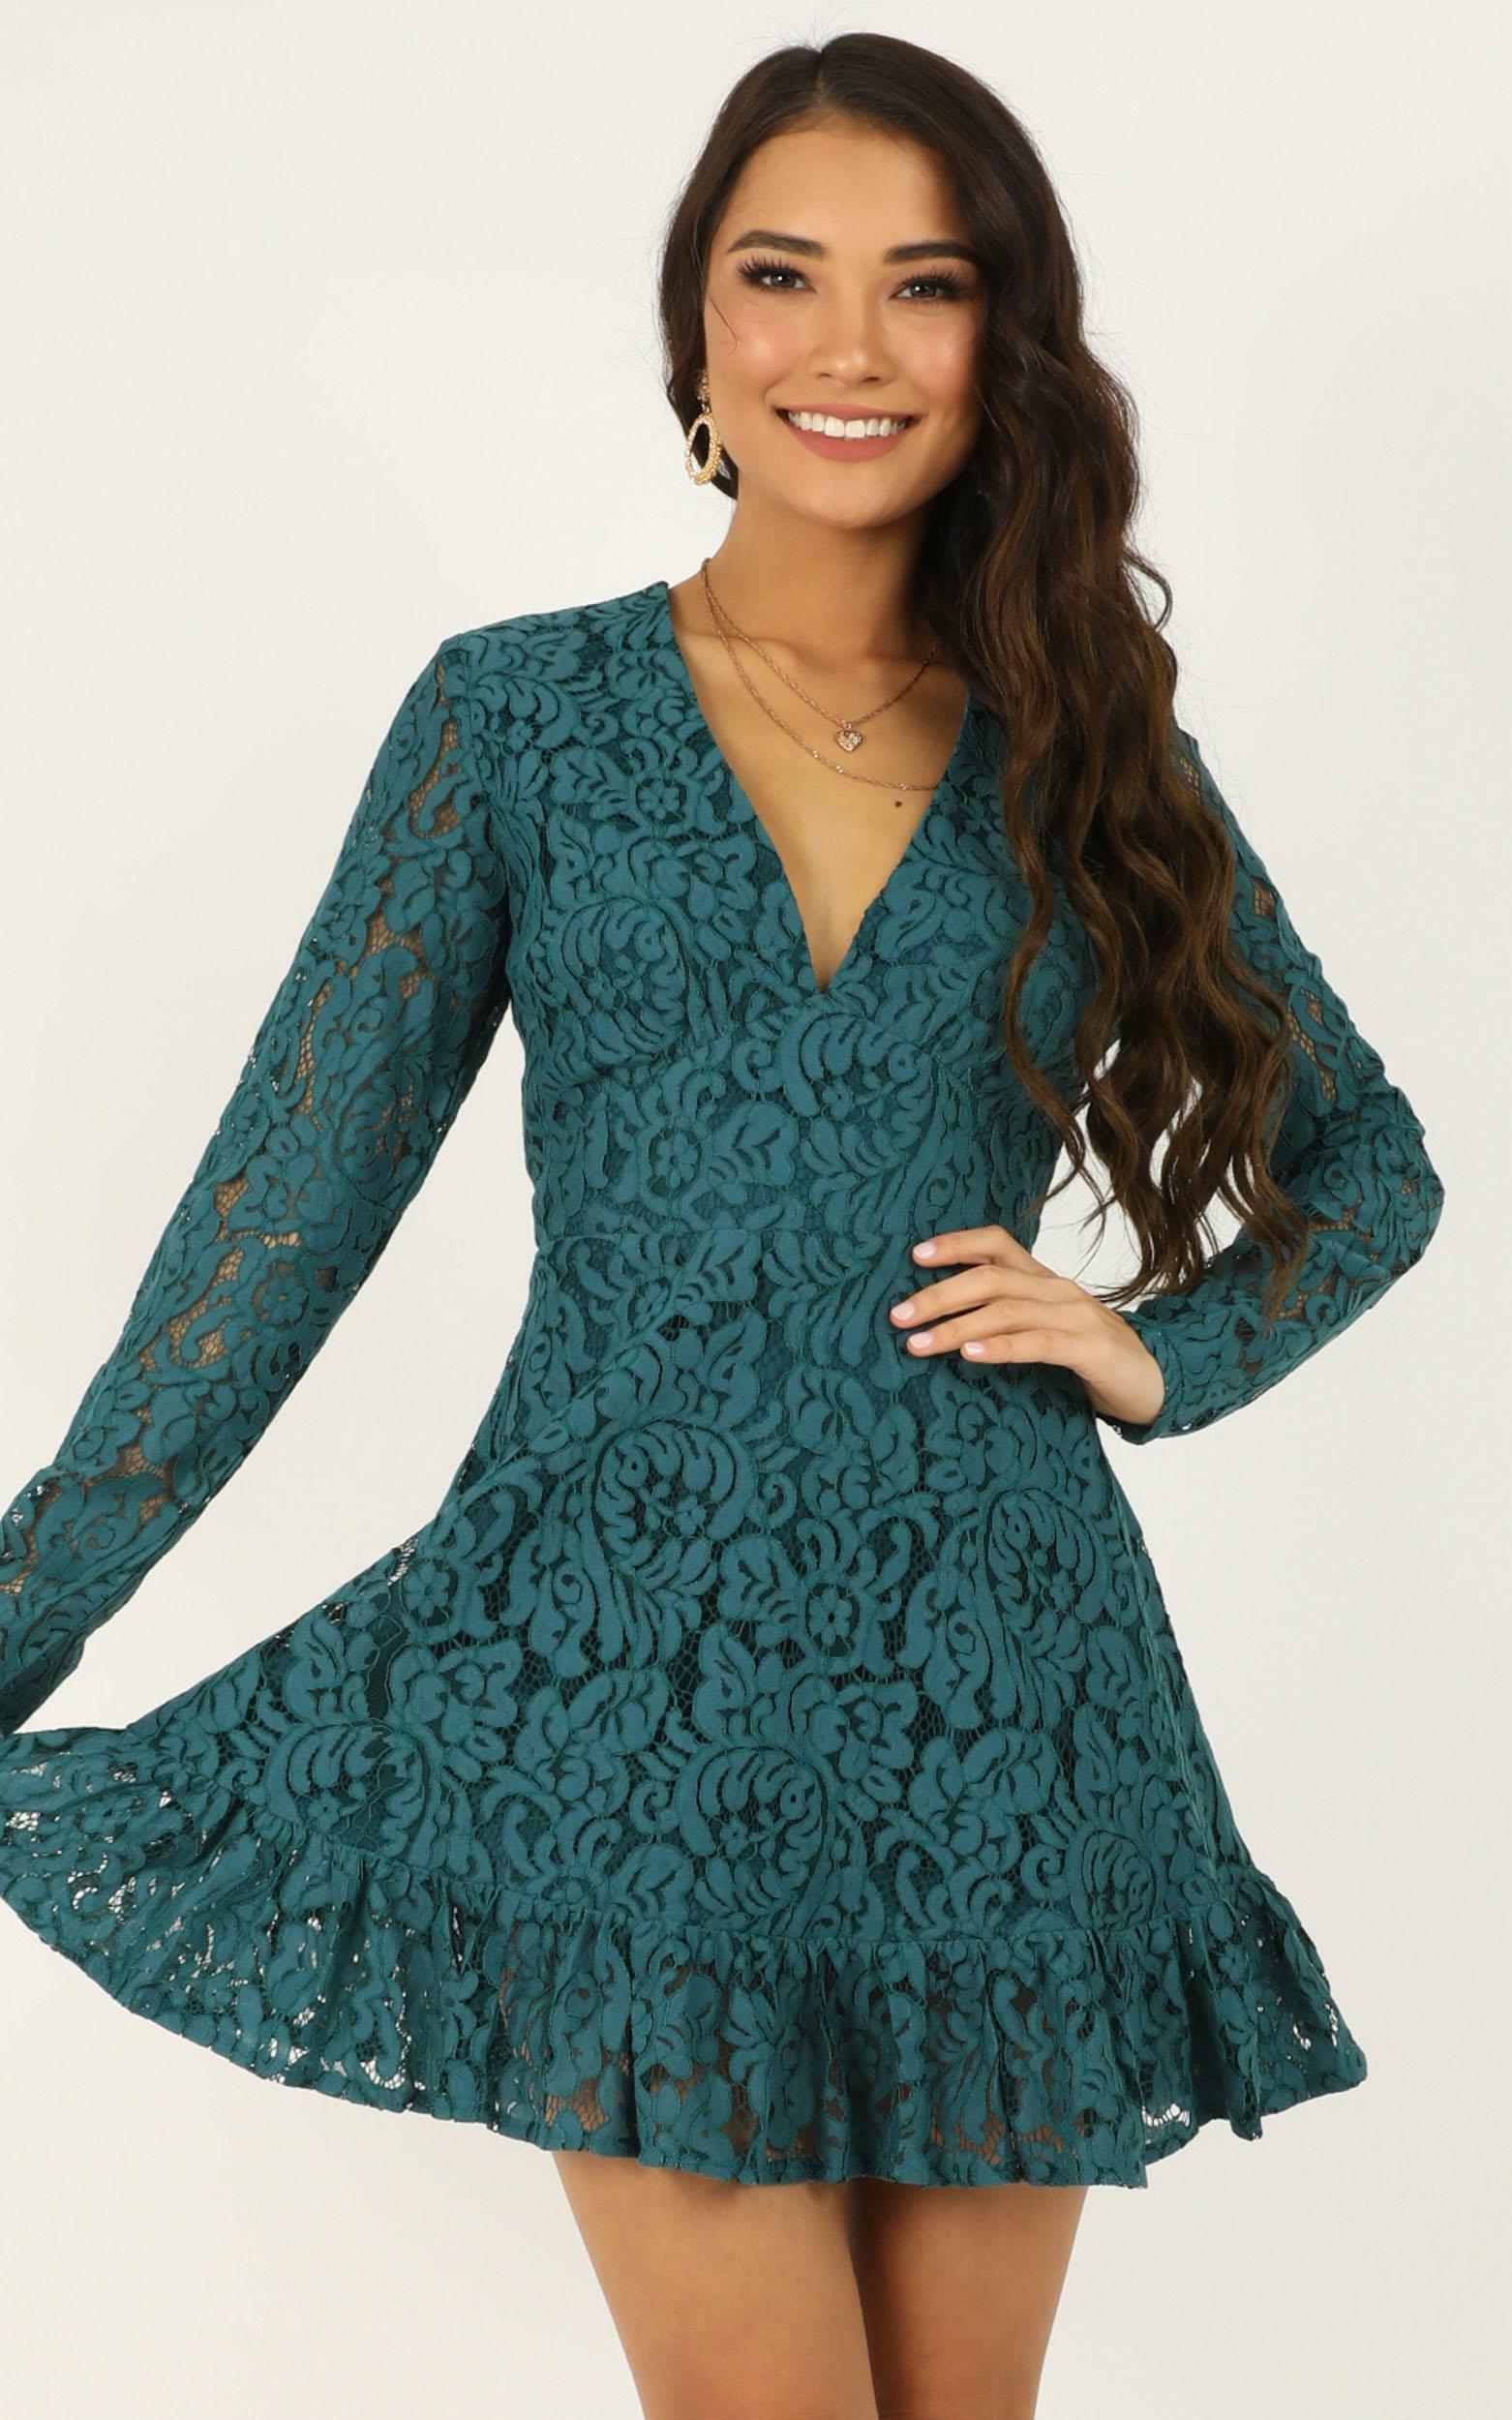 teal lace dress